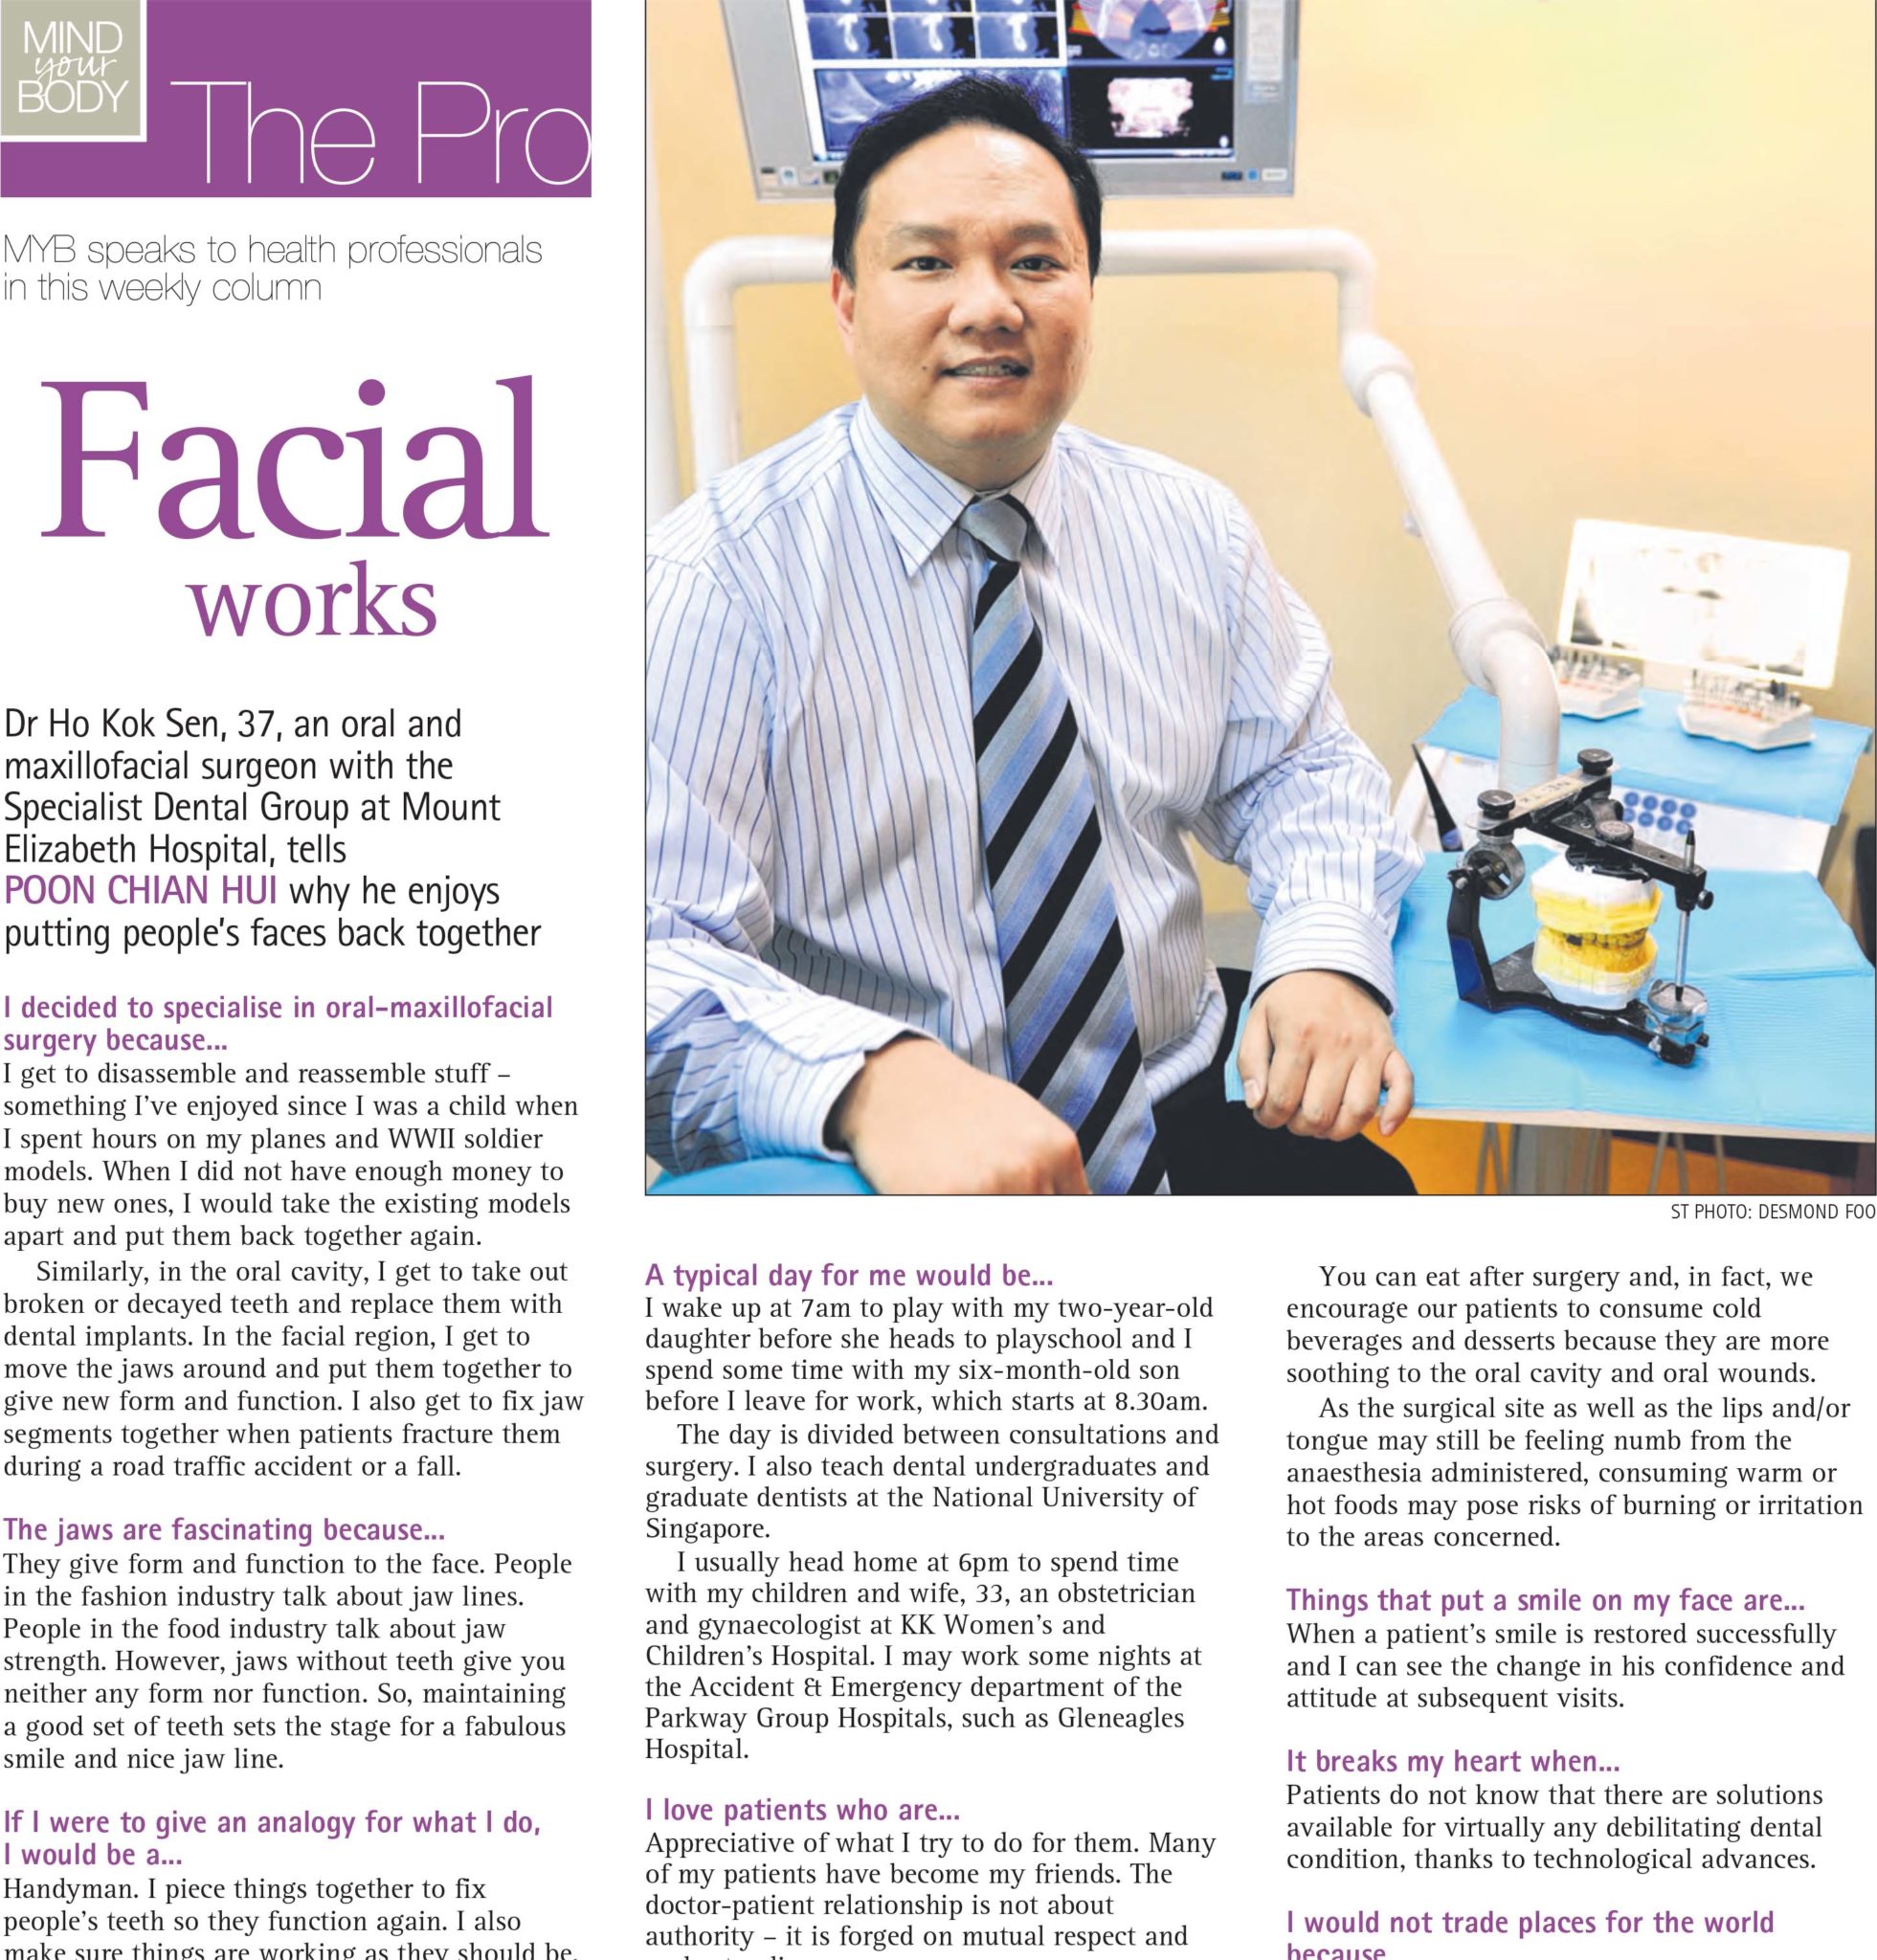 Straits Times, December 17, 2009: ST MYB Facial works (zh)